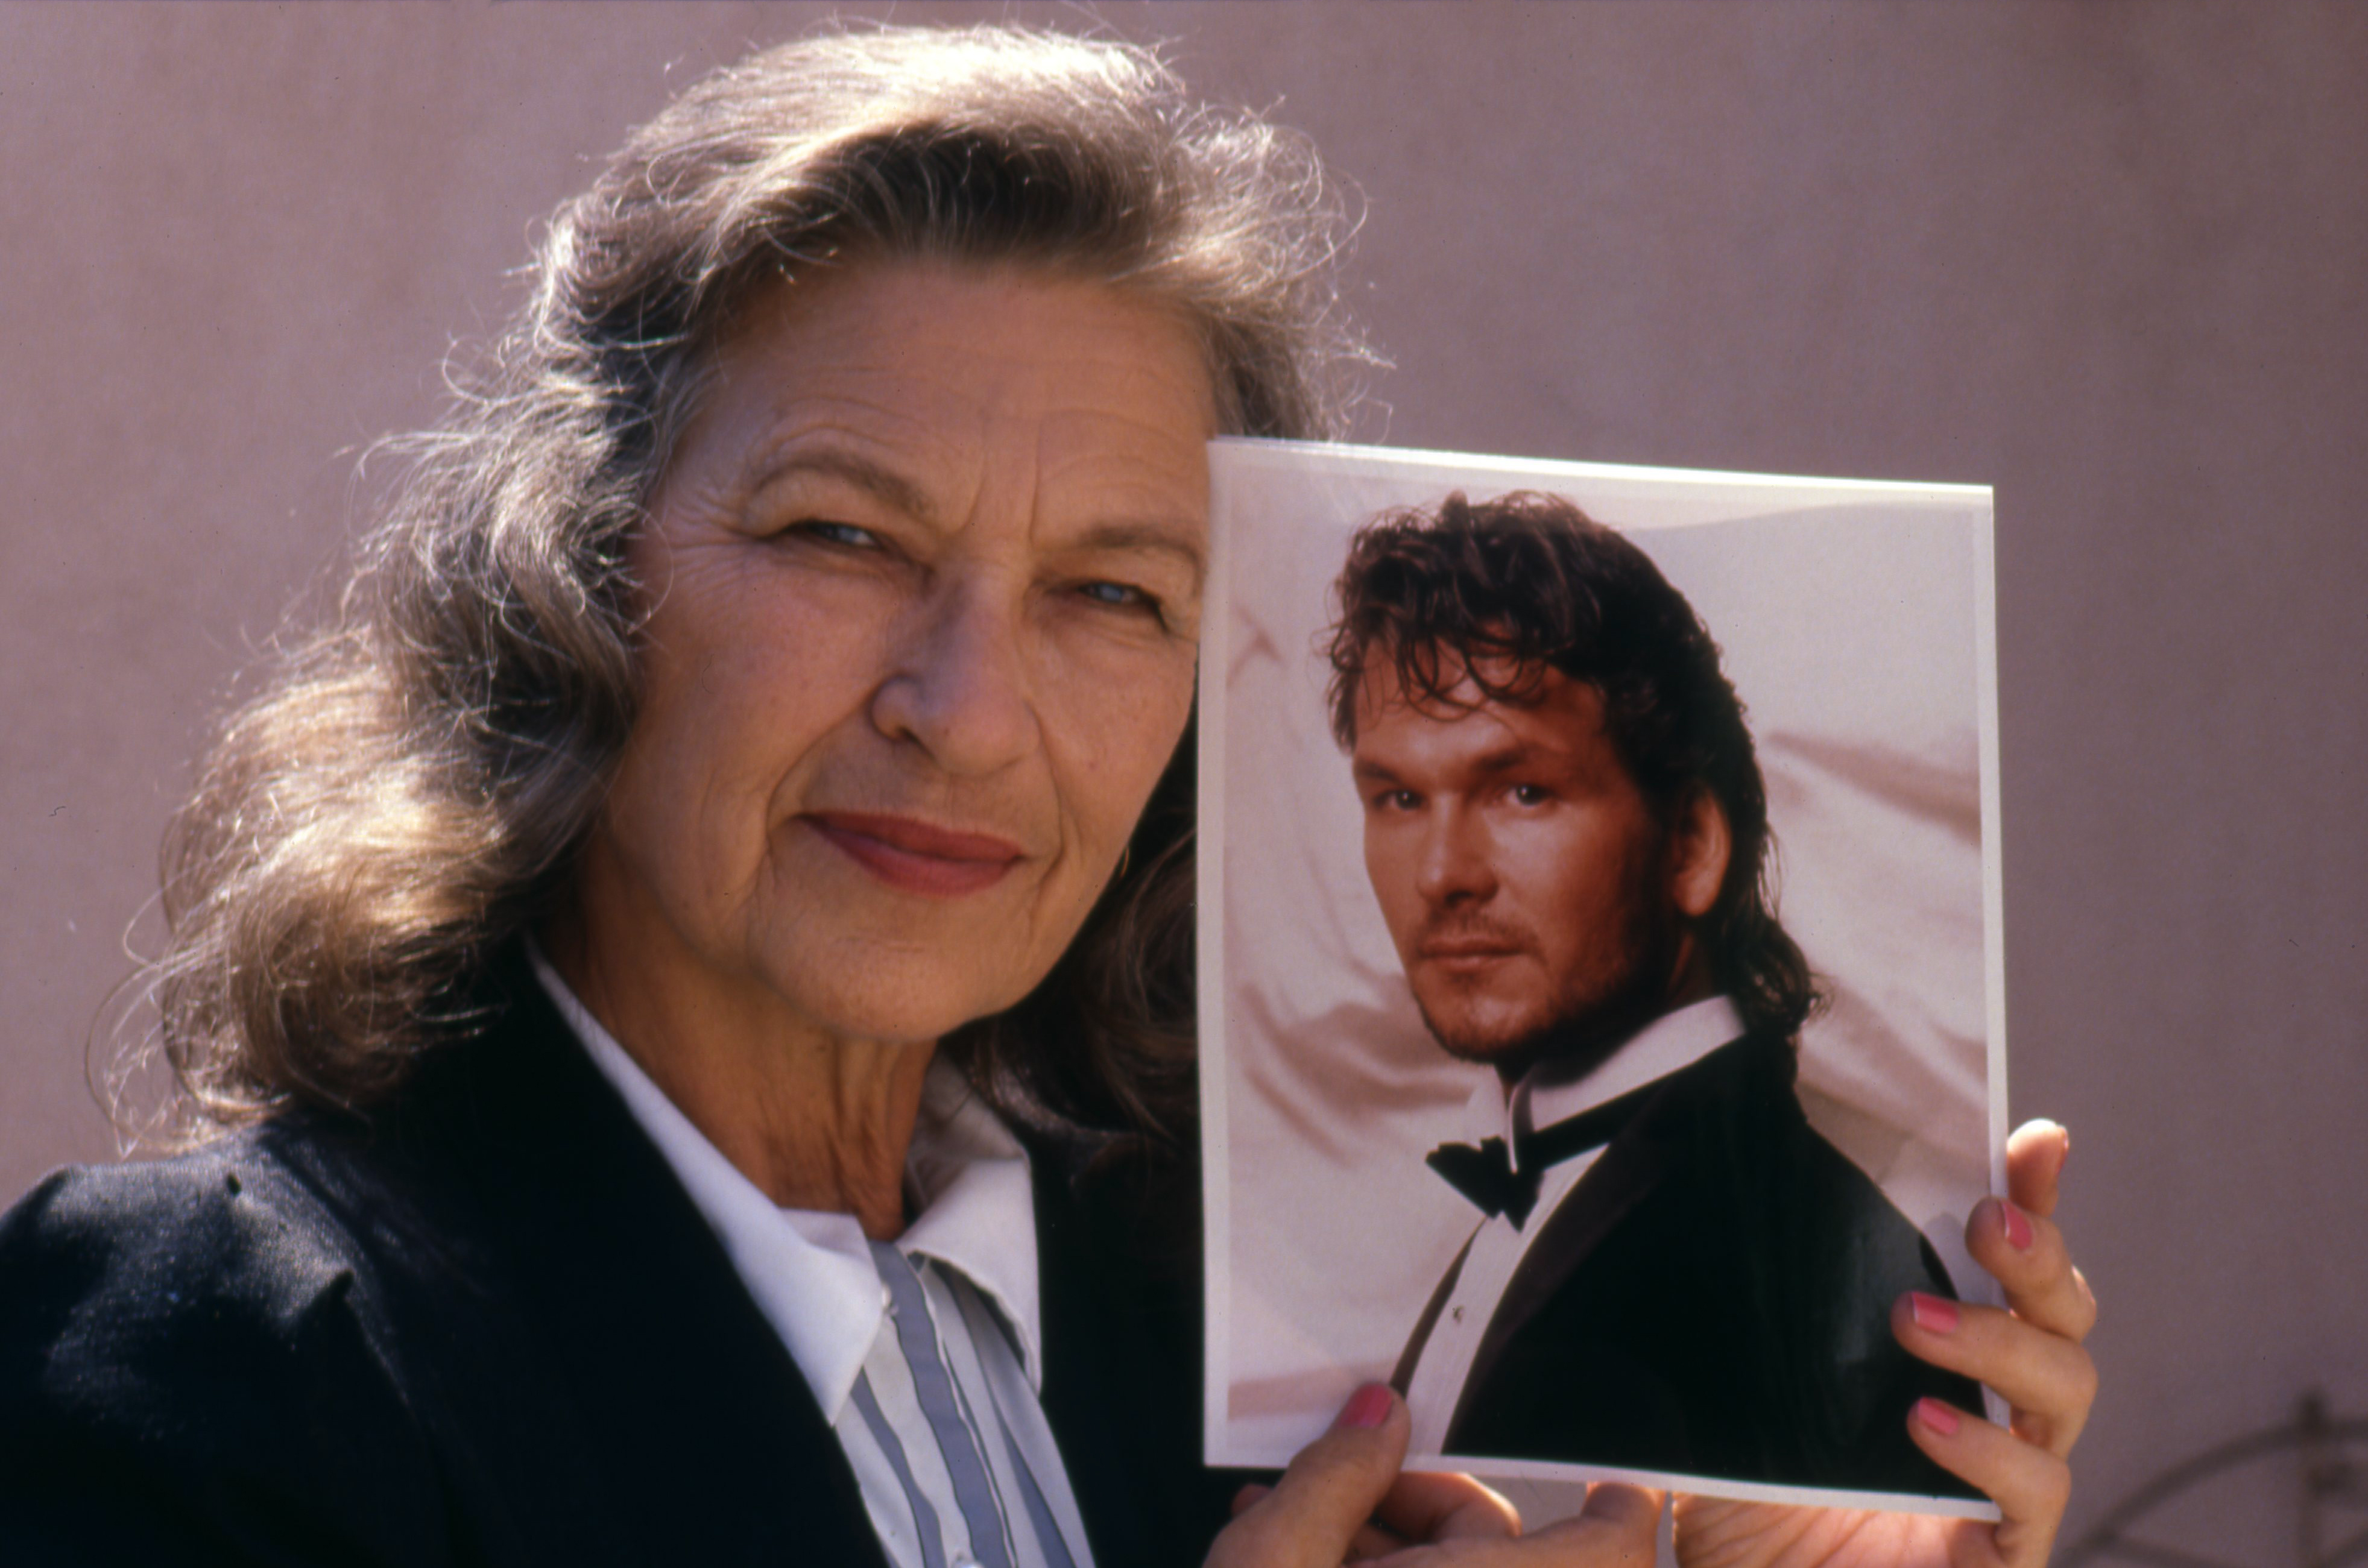 Patsy Swayze poses for a portrait holding a headshot of her son, Patrick Swayze in circa 1988 | Source: Getty Images